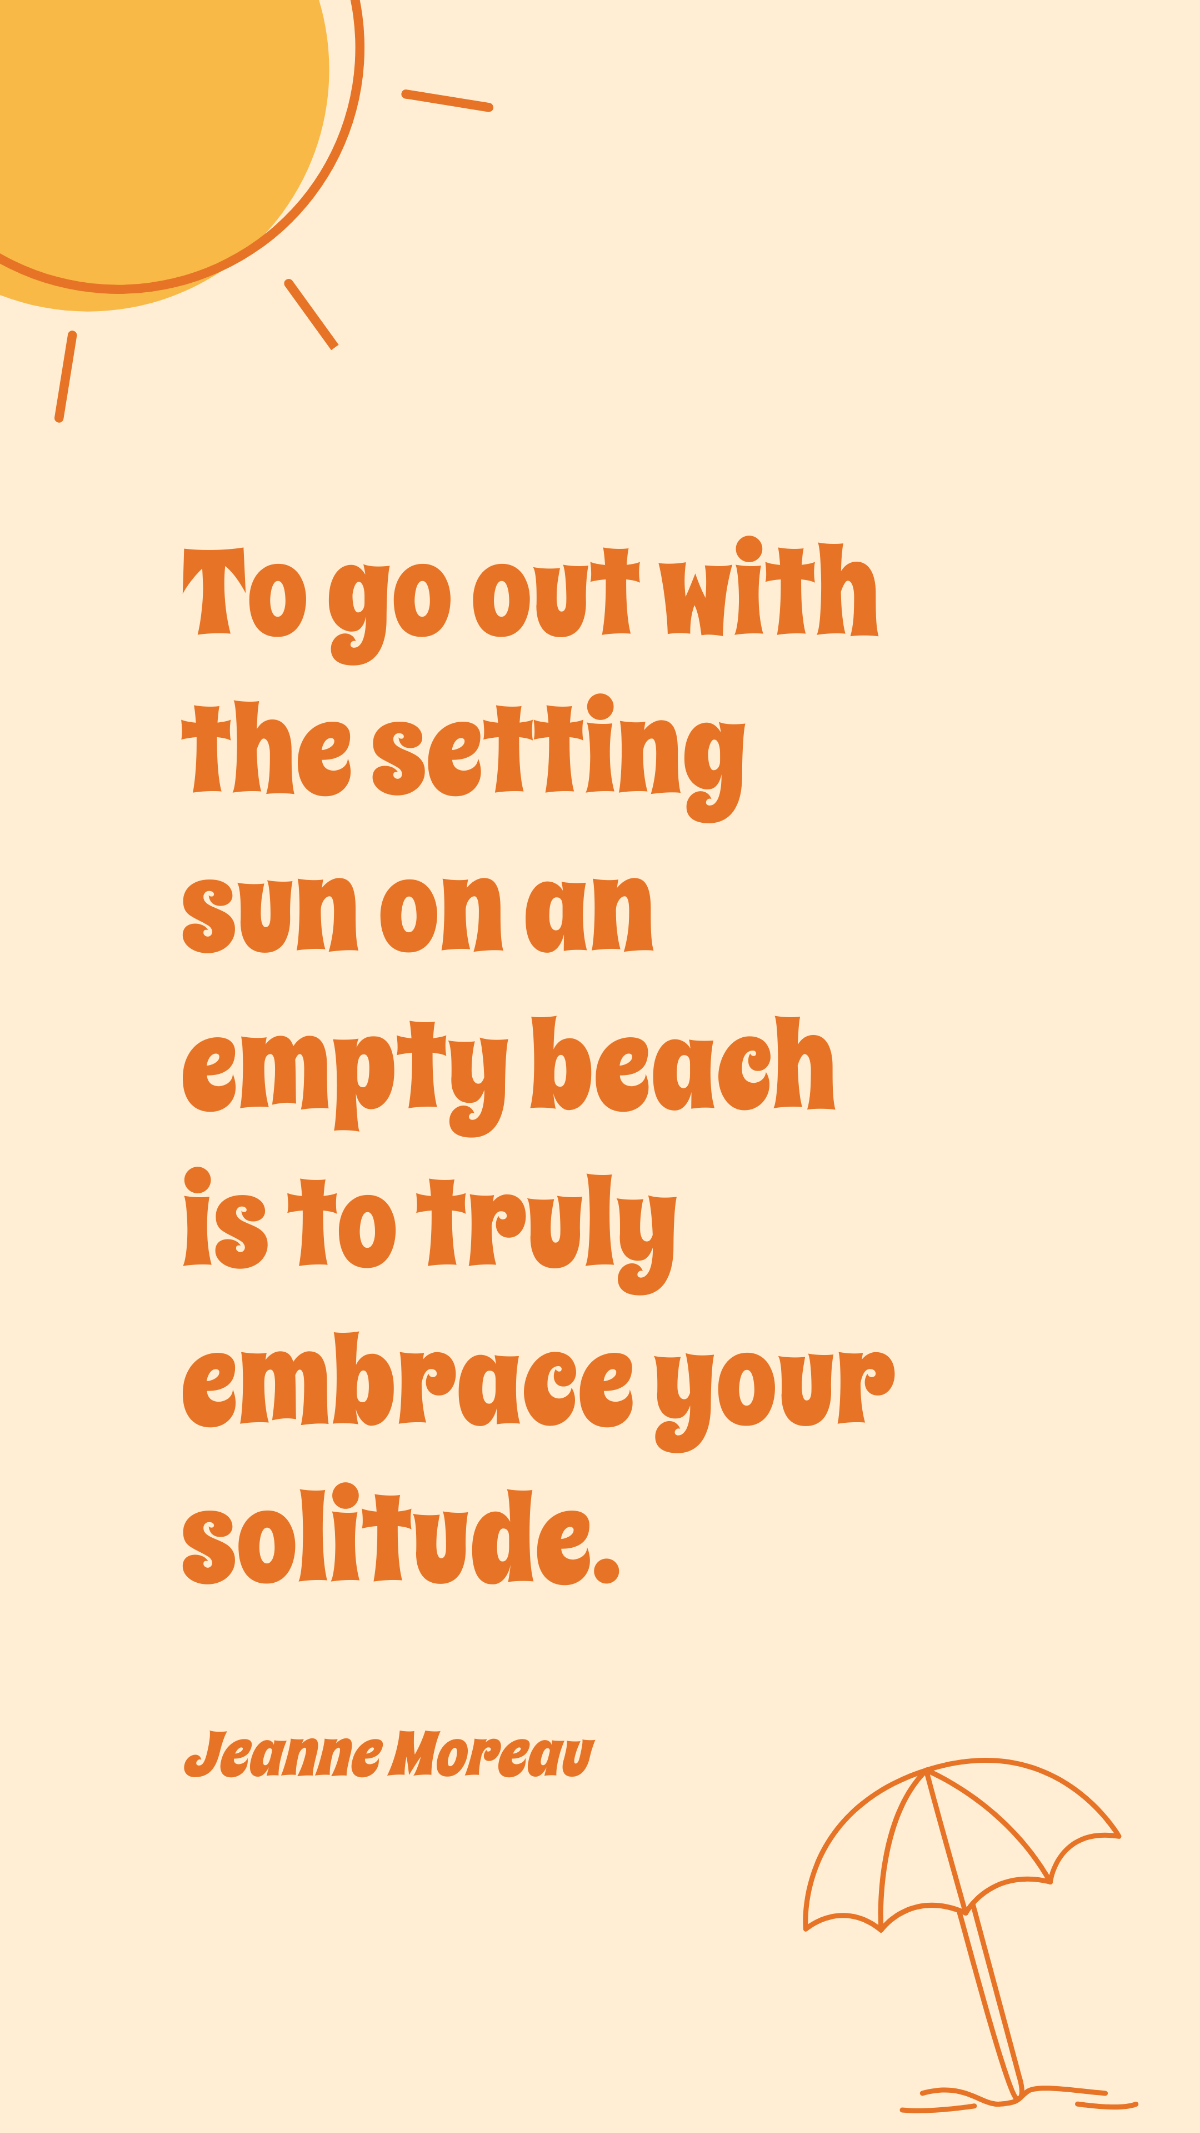 Free Jeanne Moreau - To go out with the setting sun on an empty beach is to truly embrace your solitude. Template